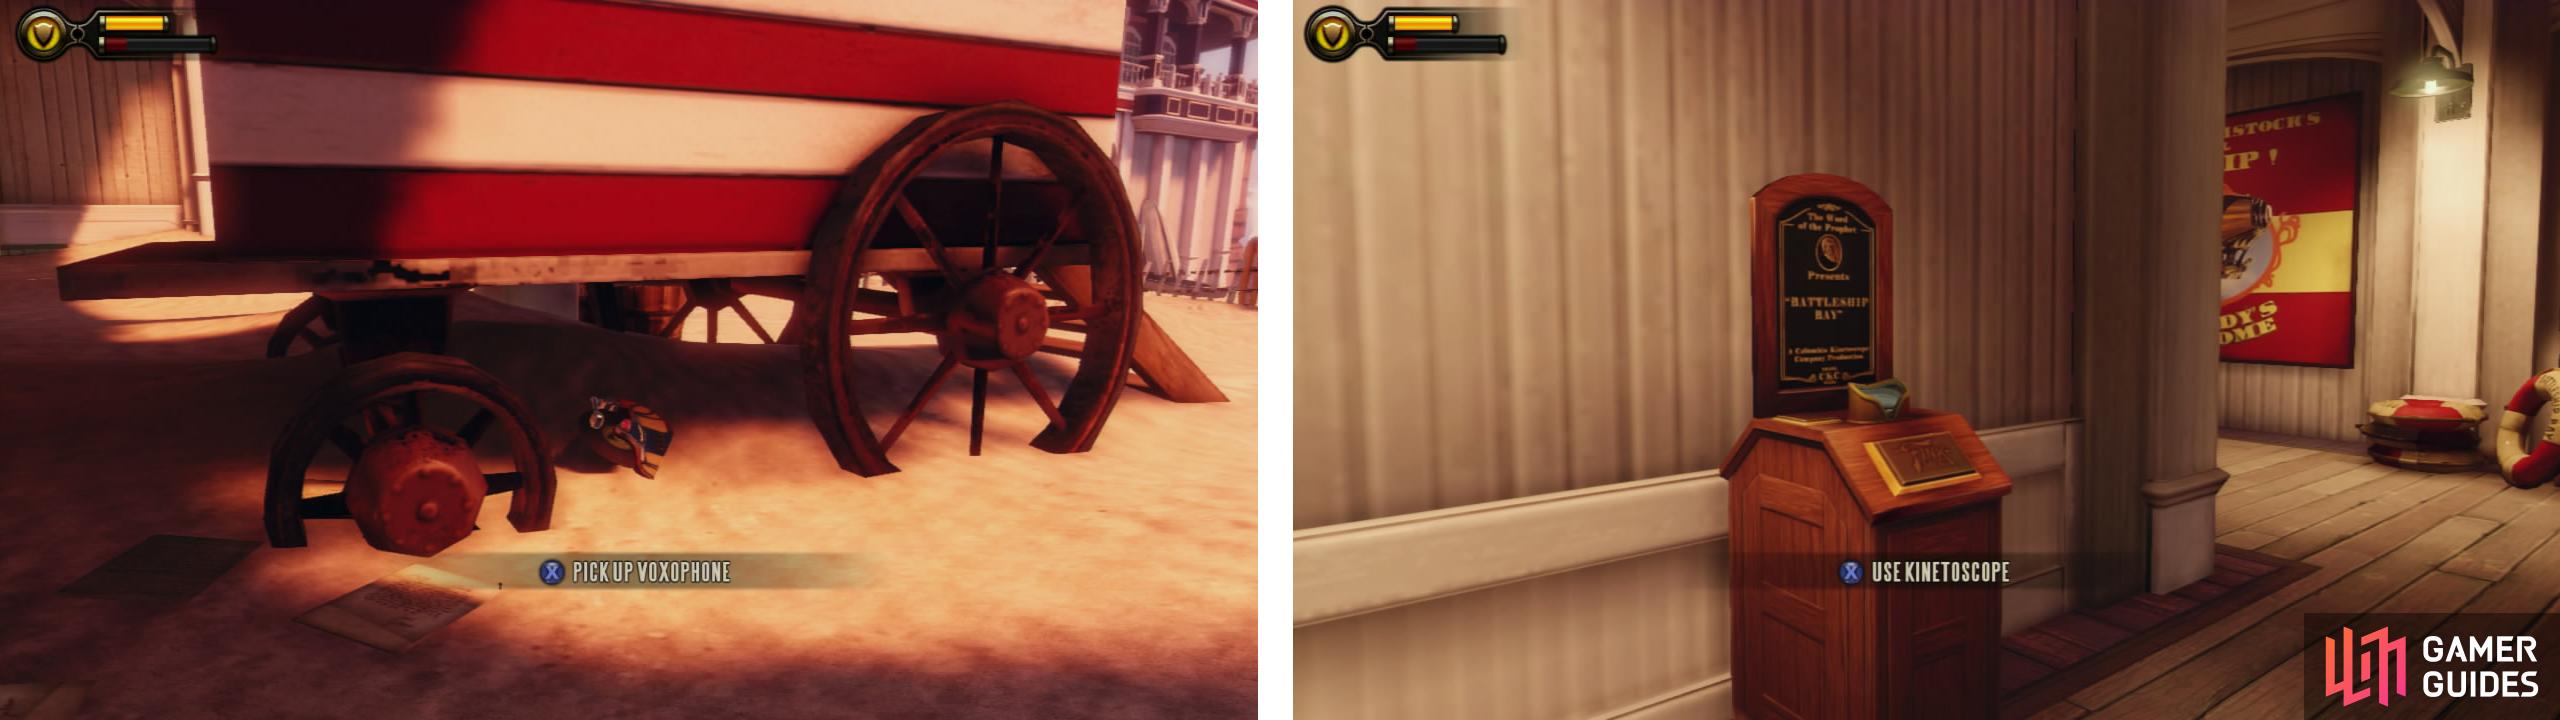 Look beneath the shed for a Voxophone (left). Before exiting the first building, grab the Kinetoscope (right).